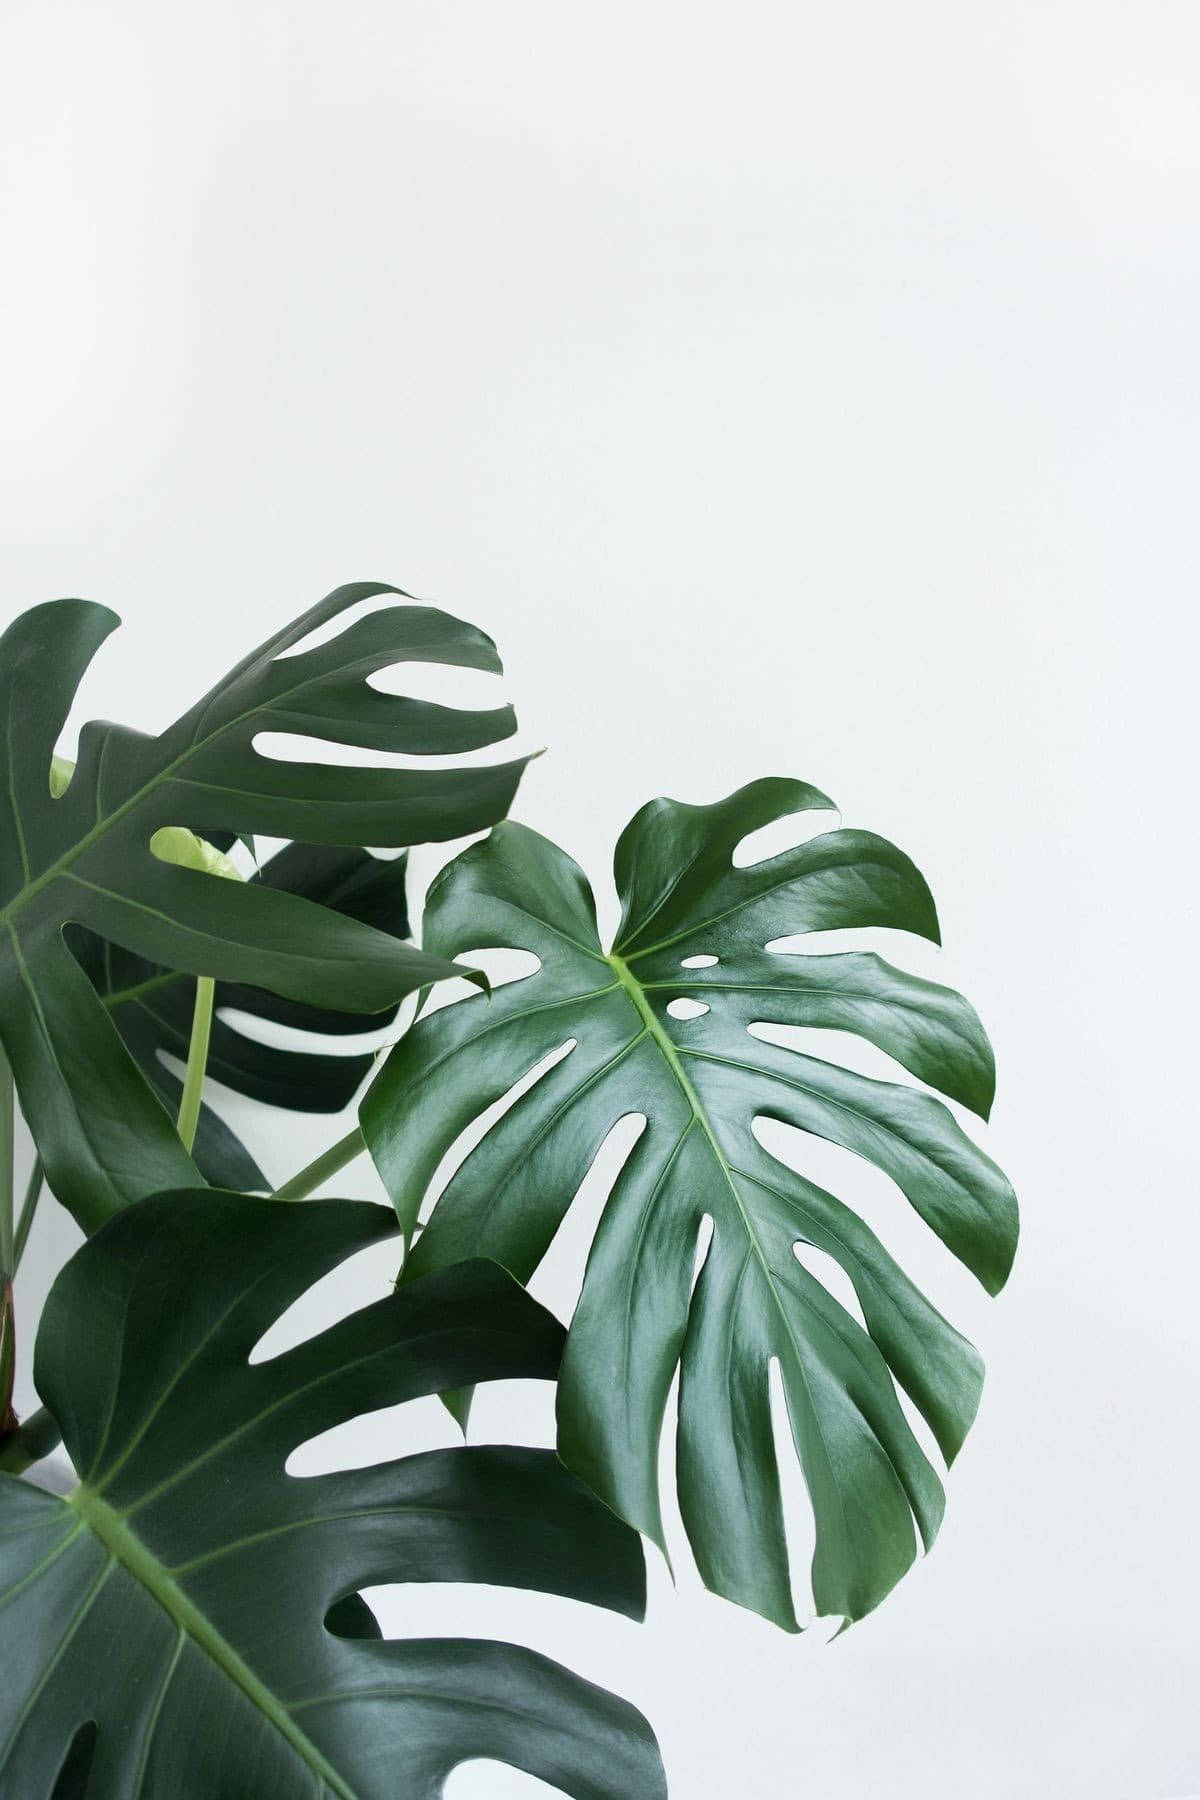 Swiss Cheese Plant Green And White Aesthetic Wallpaper